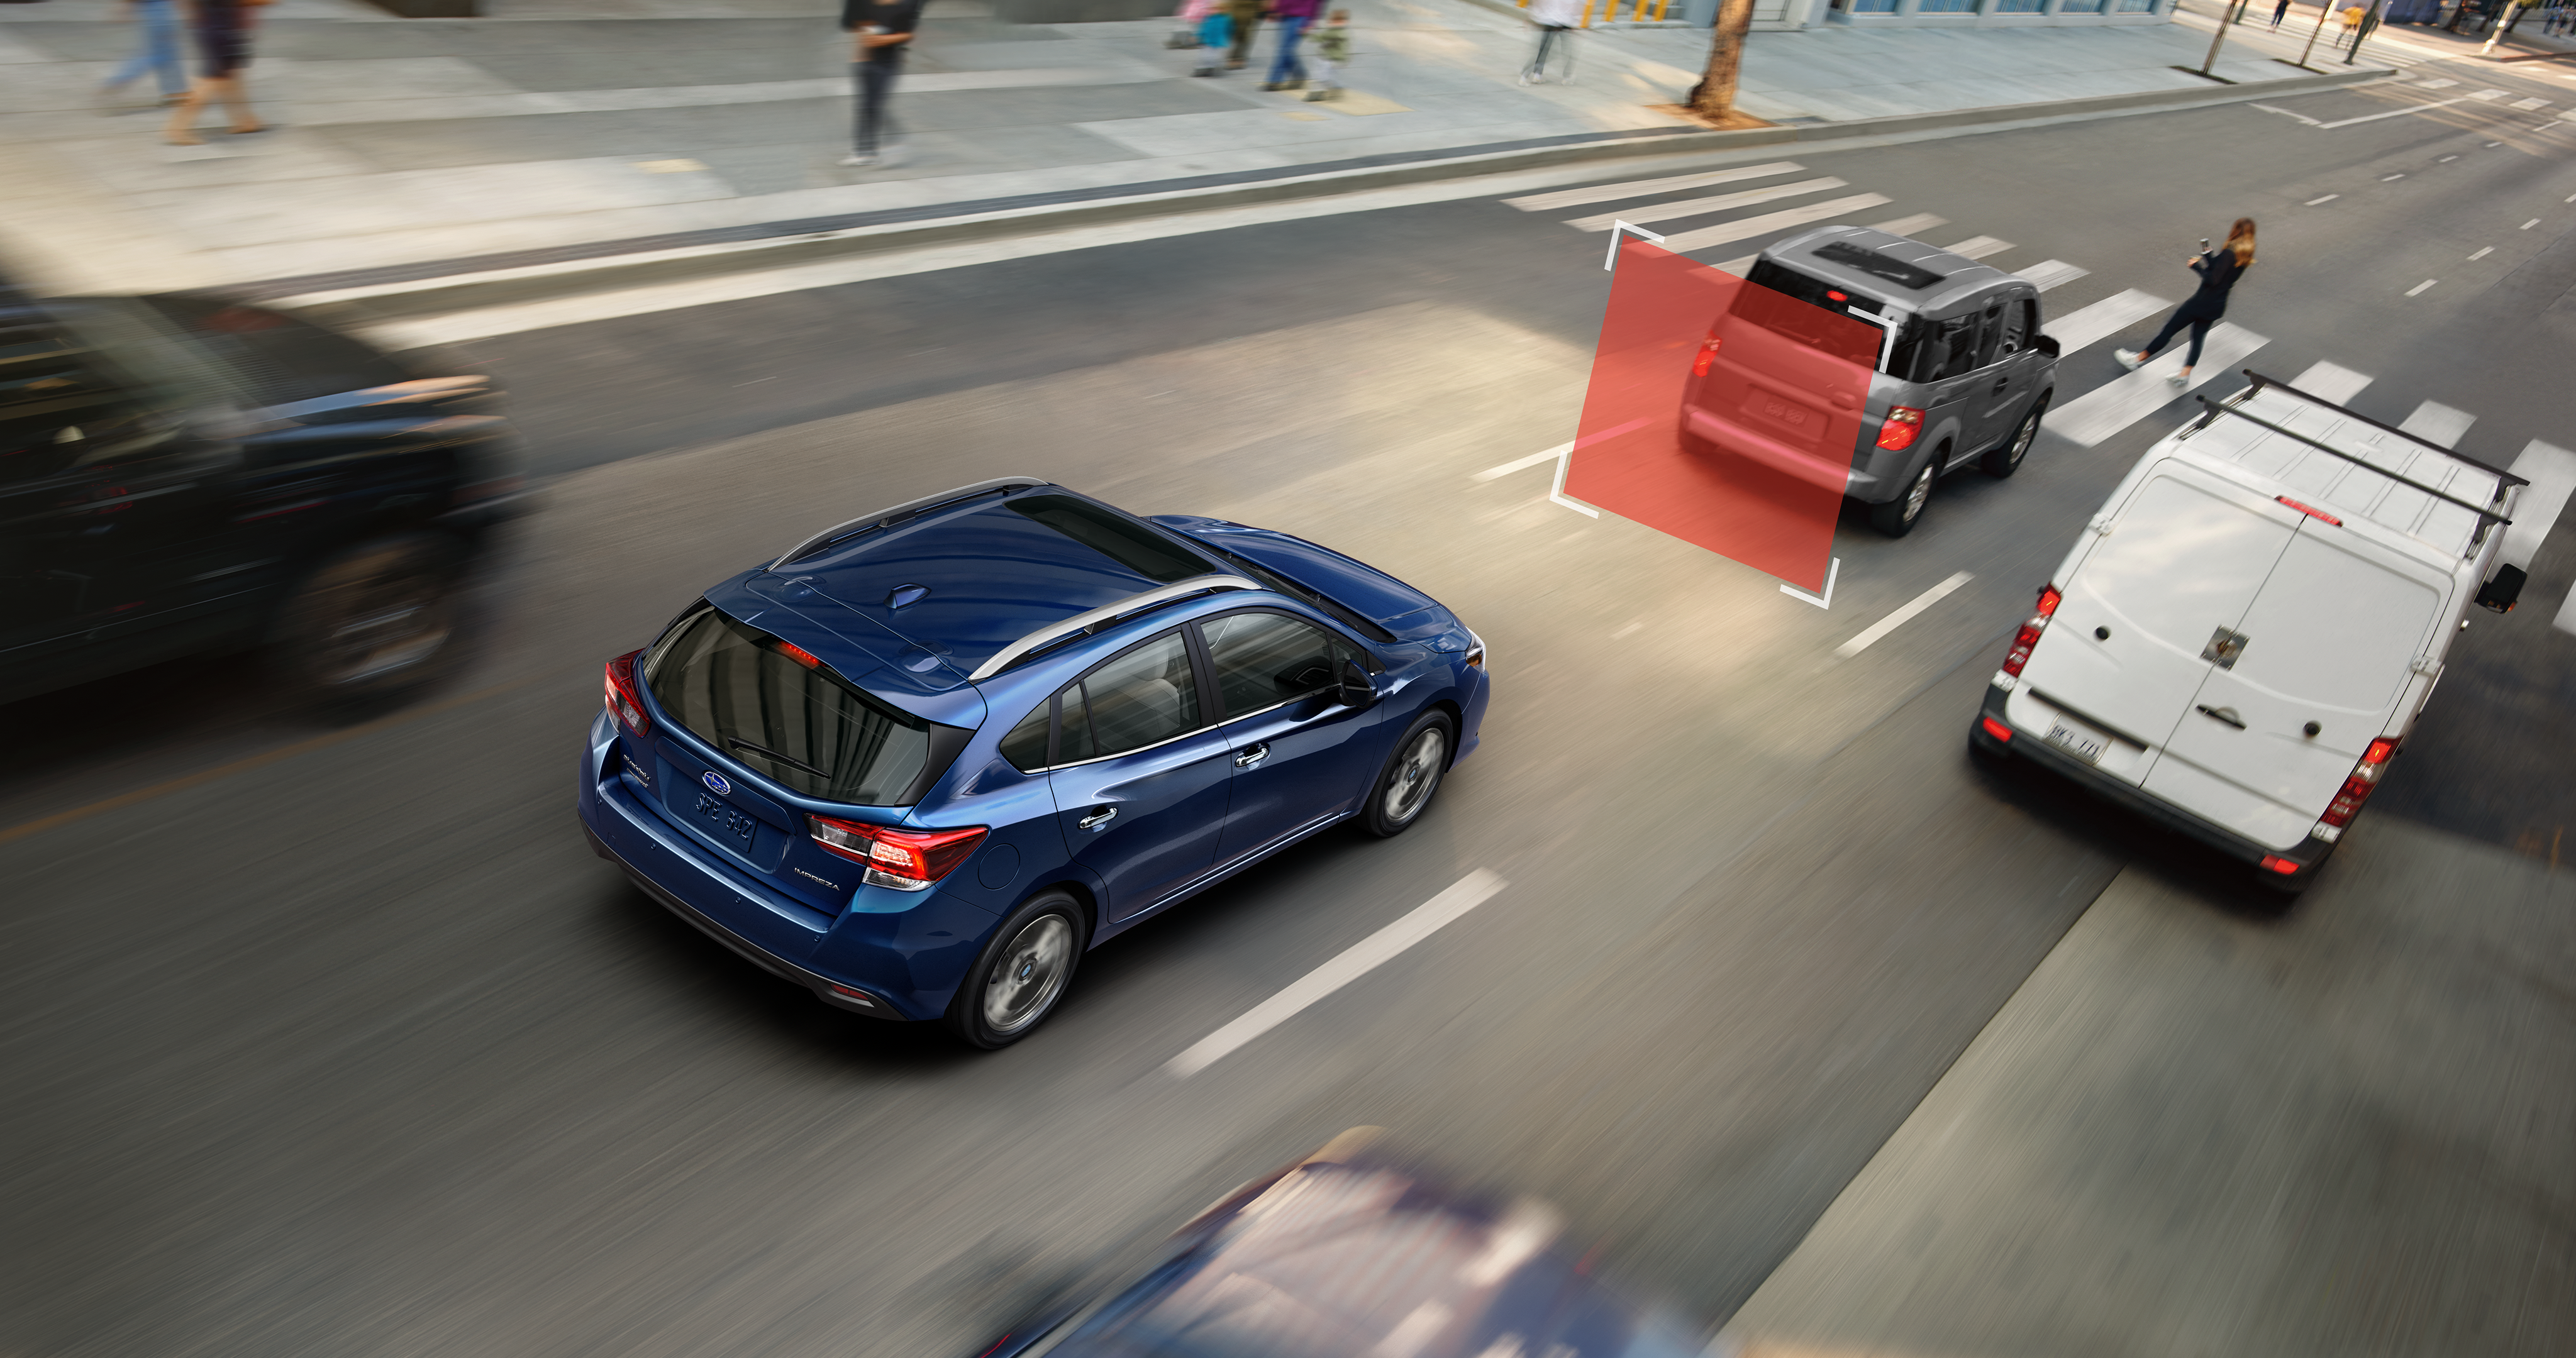 A photo illustration showing Automatic Pre-Collision Braking feature of the 2023 Impreza hatchback.